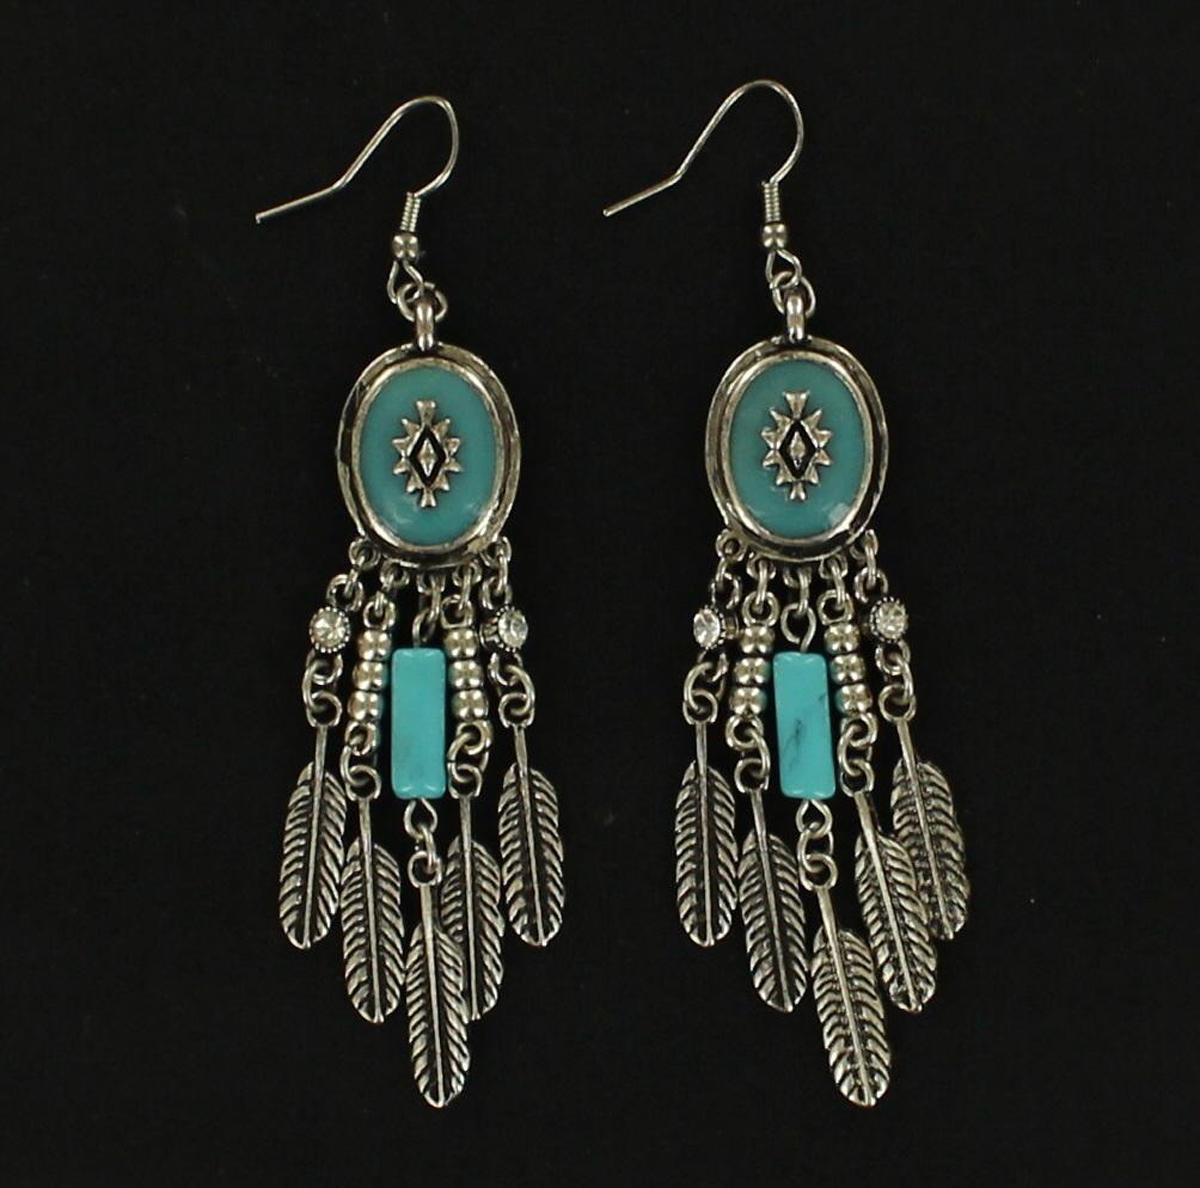 30636 Chandelier Style Feather Earrings, Turquoise